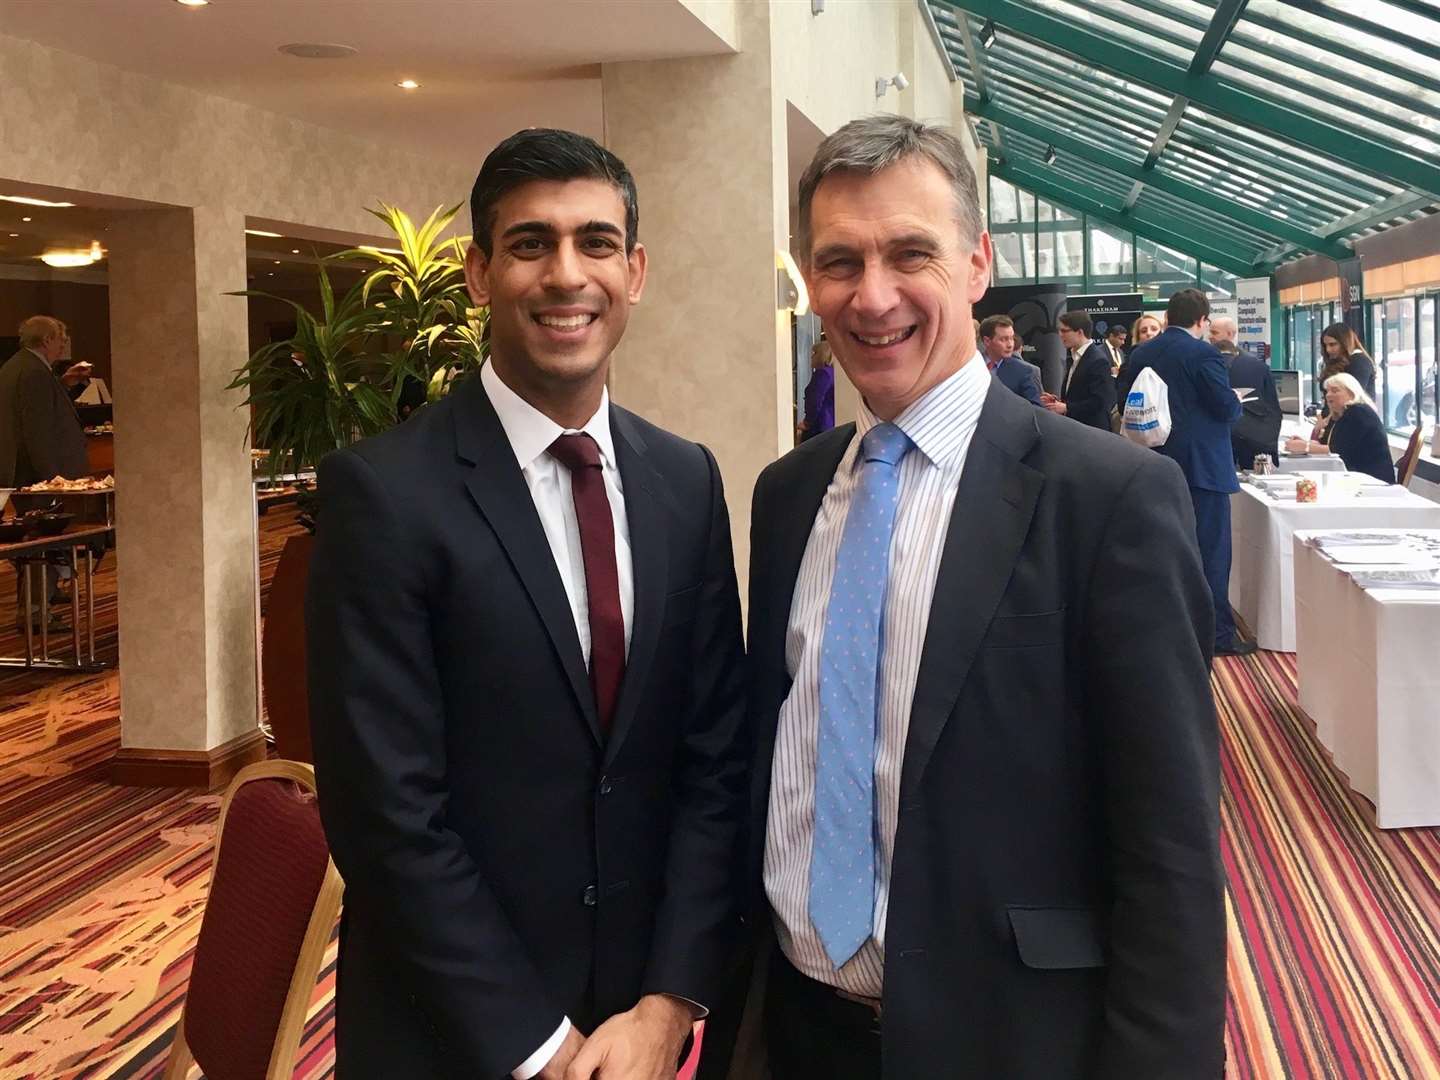 Cllr Rory Love, right, pictured with Prime Minister Rishi Sunak